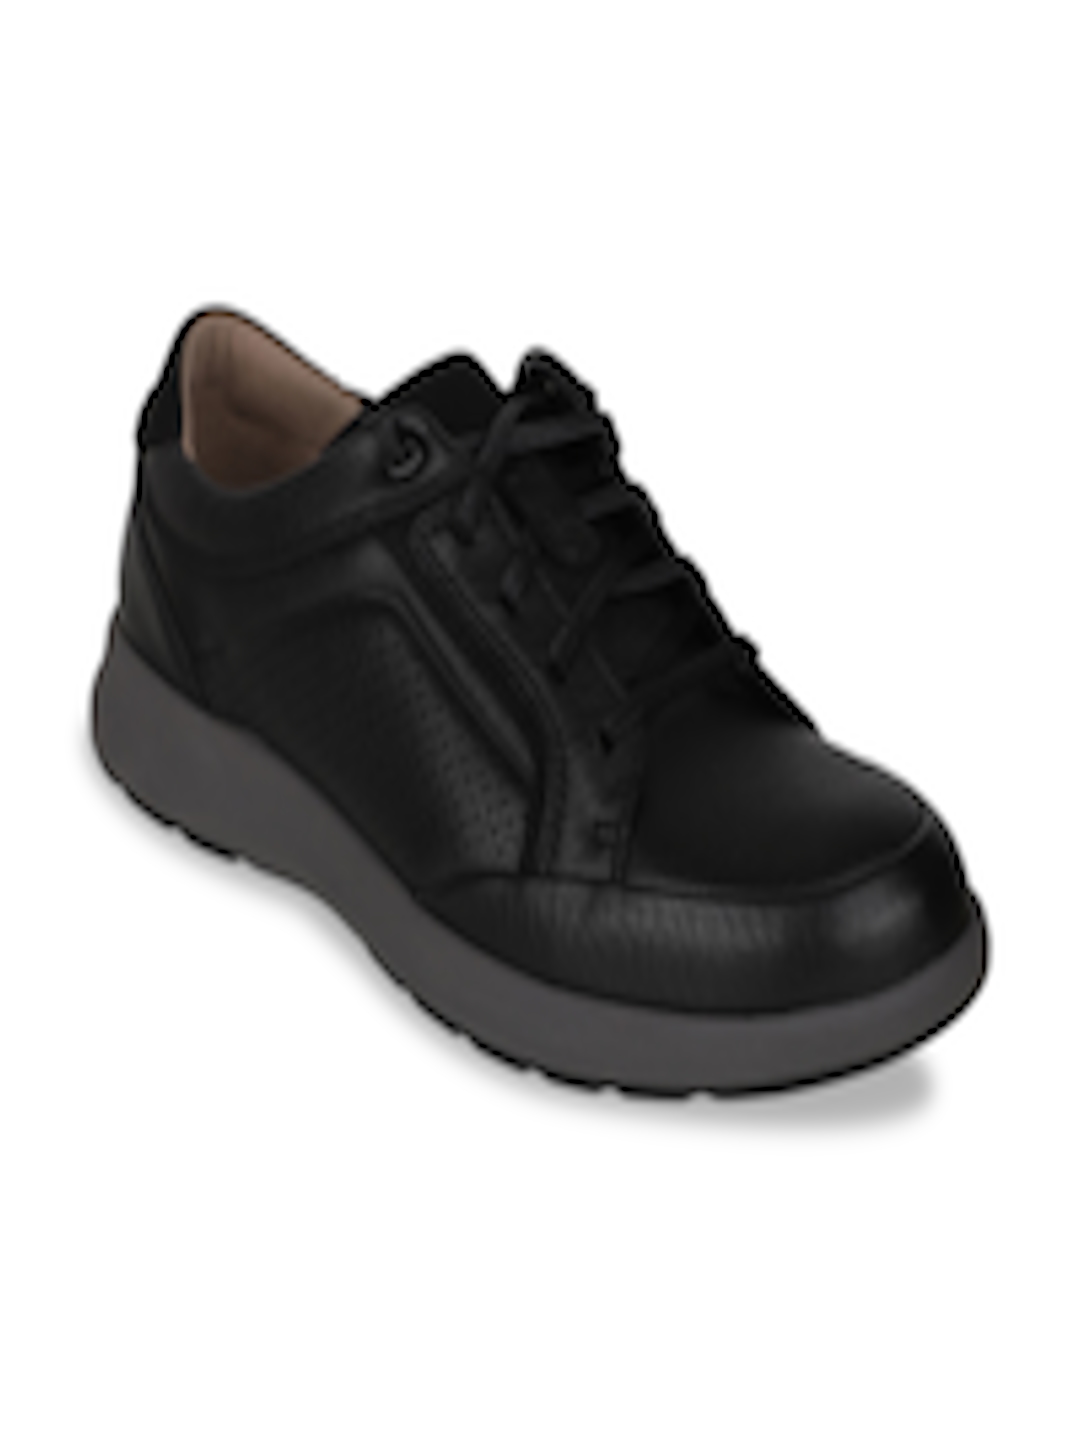 Buy Clarks Men Black Leather Sneakers - Casual Shoes for Men 15759146 ...